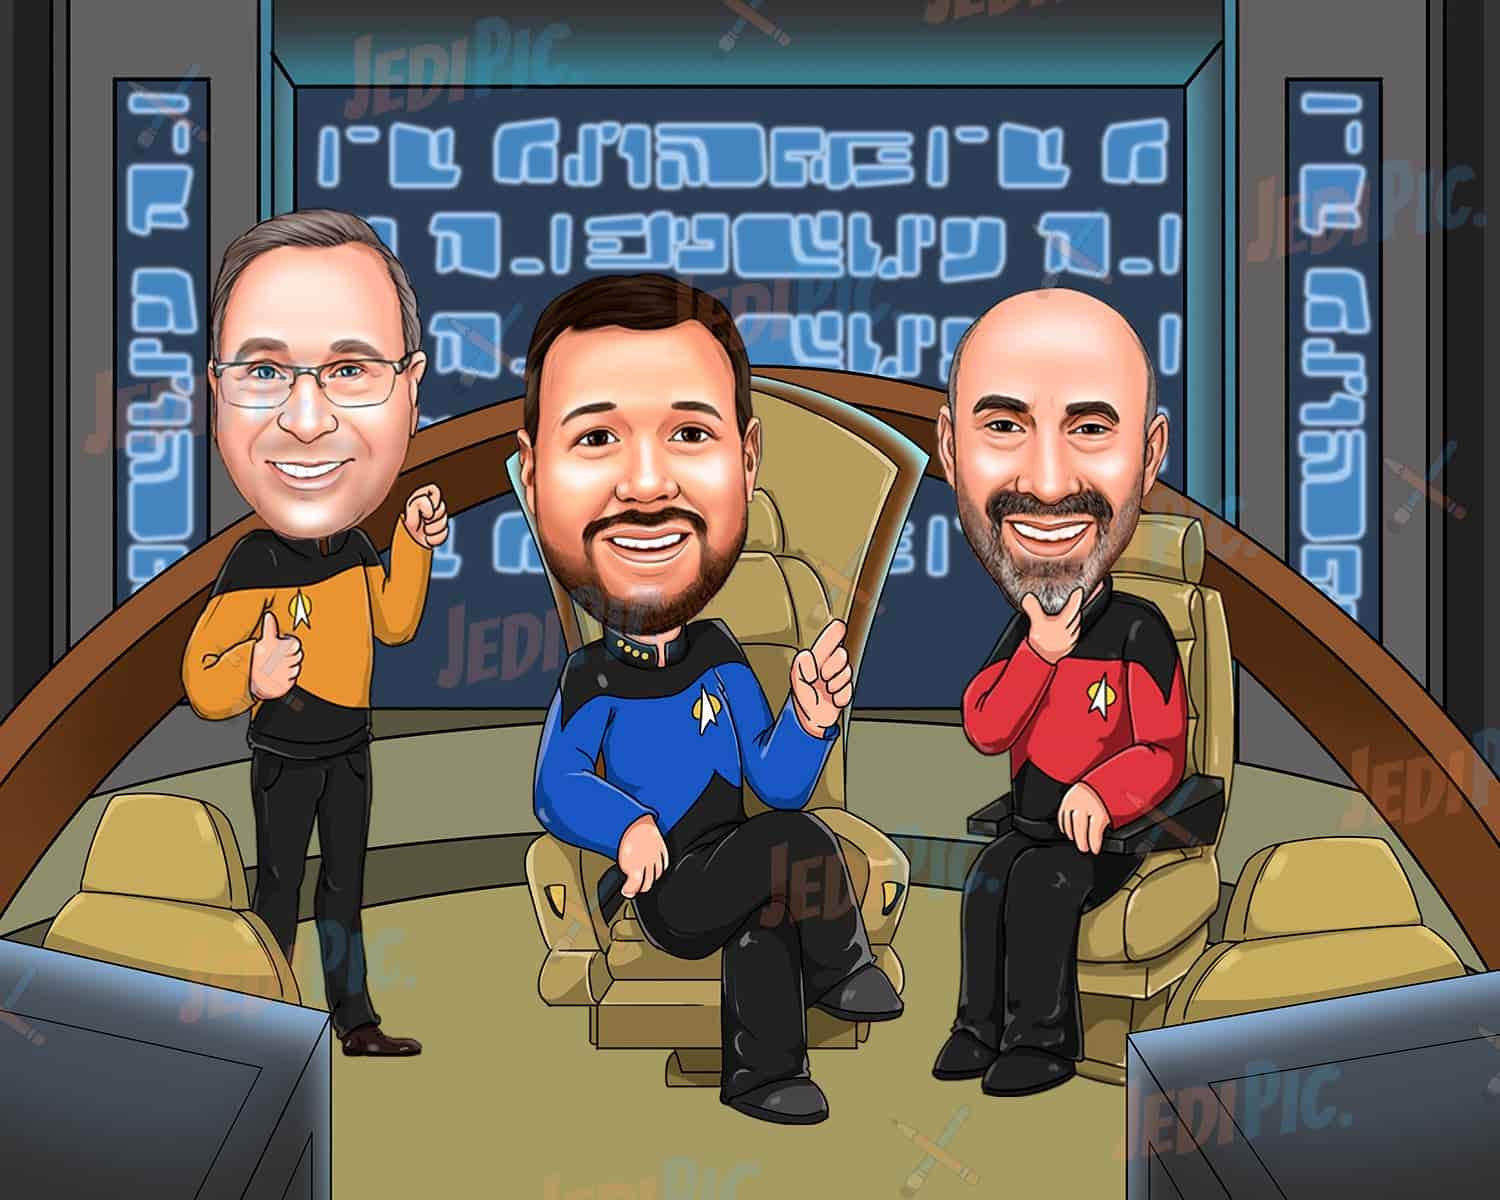 Group Caricature Drawing for Star Treck Fans